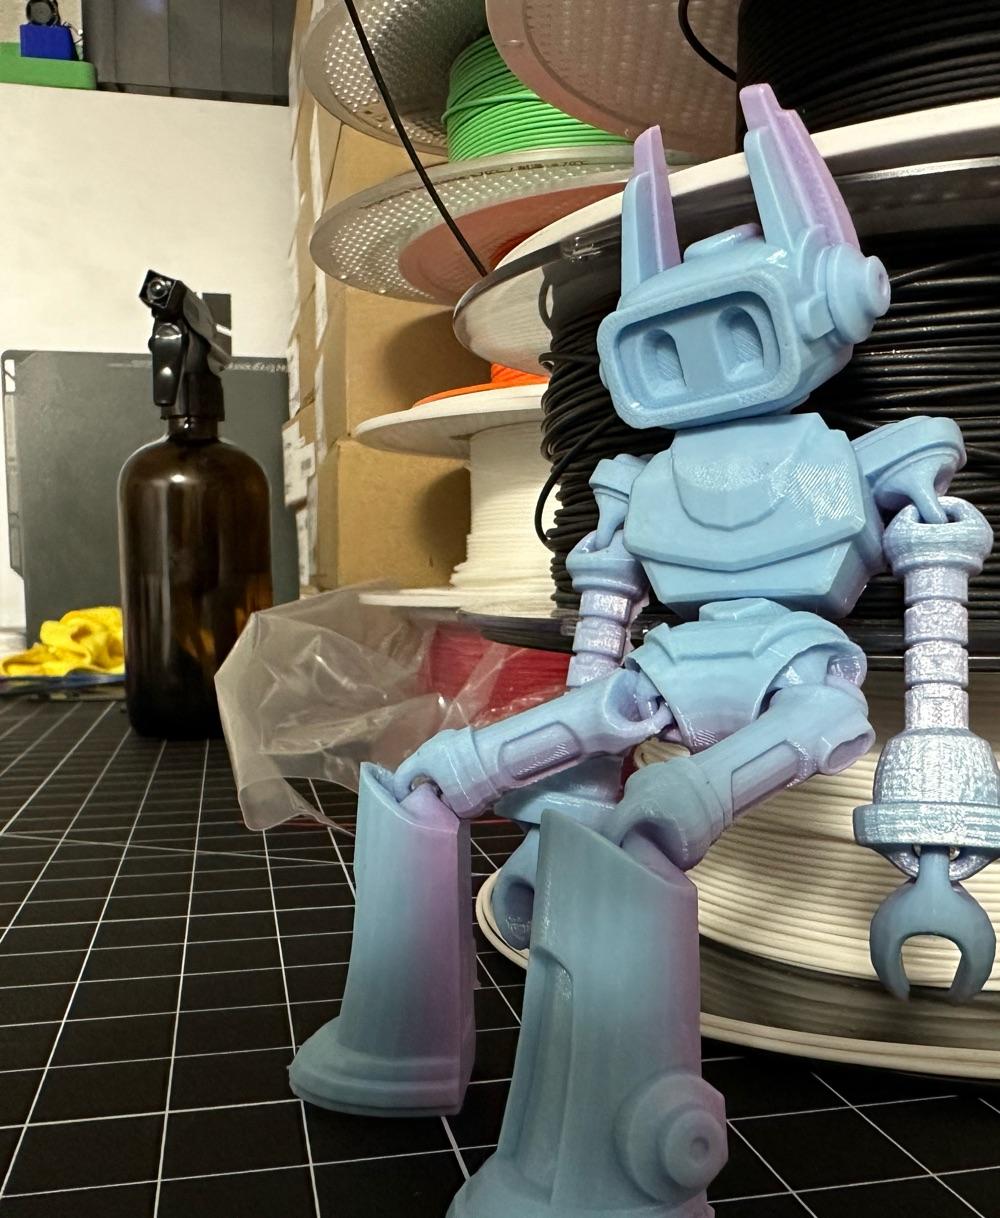 ZILLOLAAB - ZIPPY THE BOT 🤖 - Really cool print! Thanks for the hard work!

I struggled to get the hands to stick, went through about 3 prints with really slow print speeds and still managed to knock themthem loose! Eventually I added brims and it came out above!

Print was .16 layer height and Cookie cad unicorn pet g with a bambu x1c - 3d model